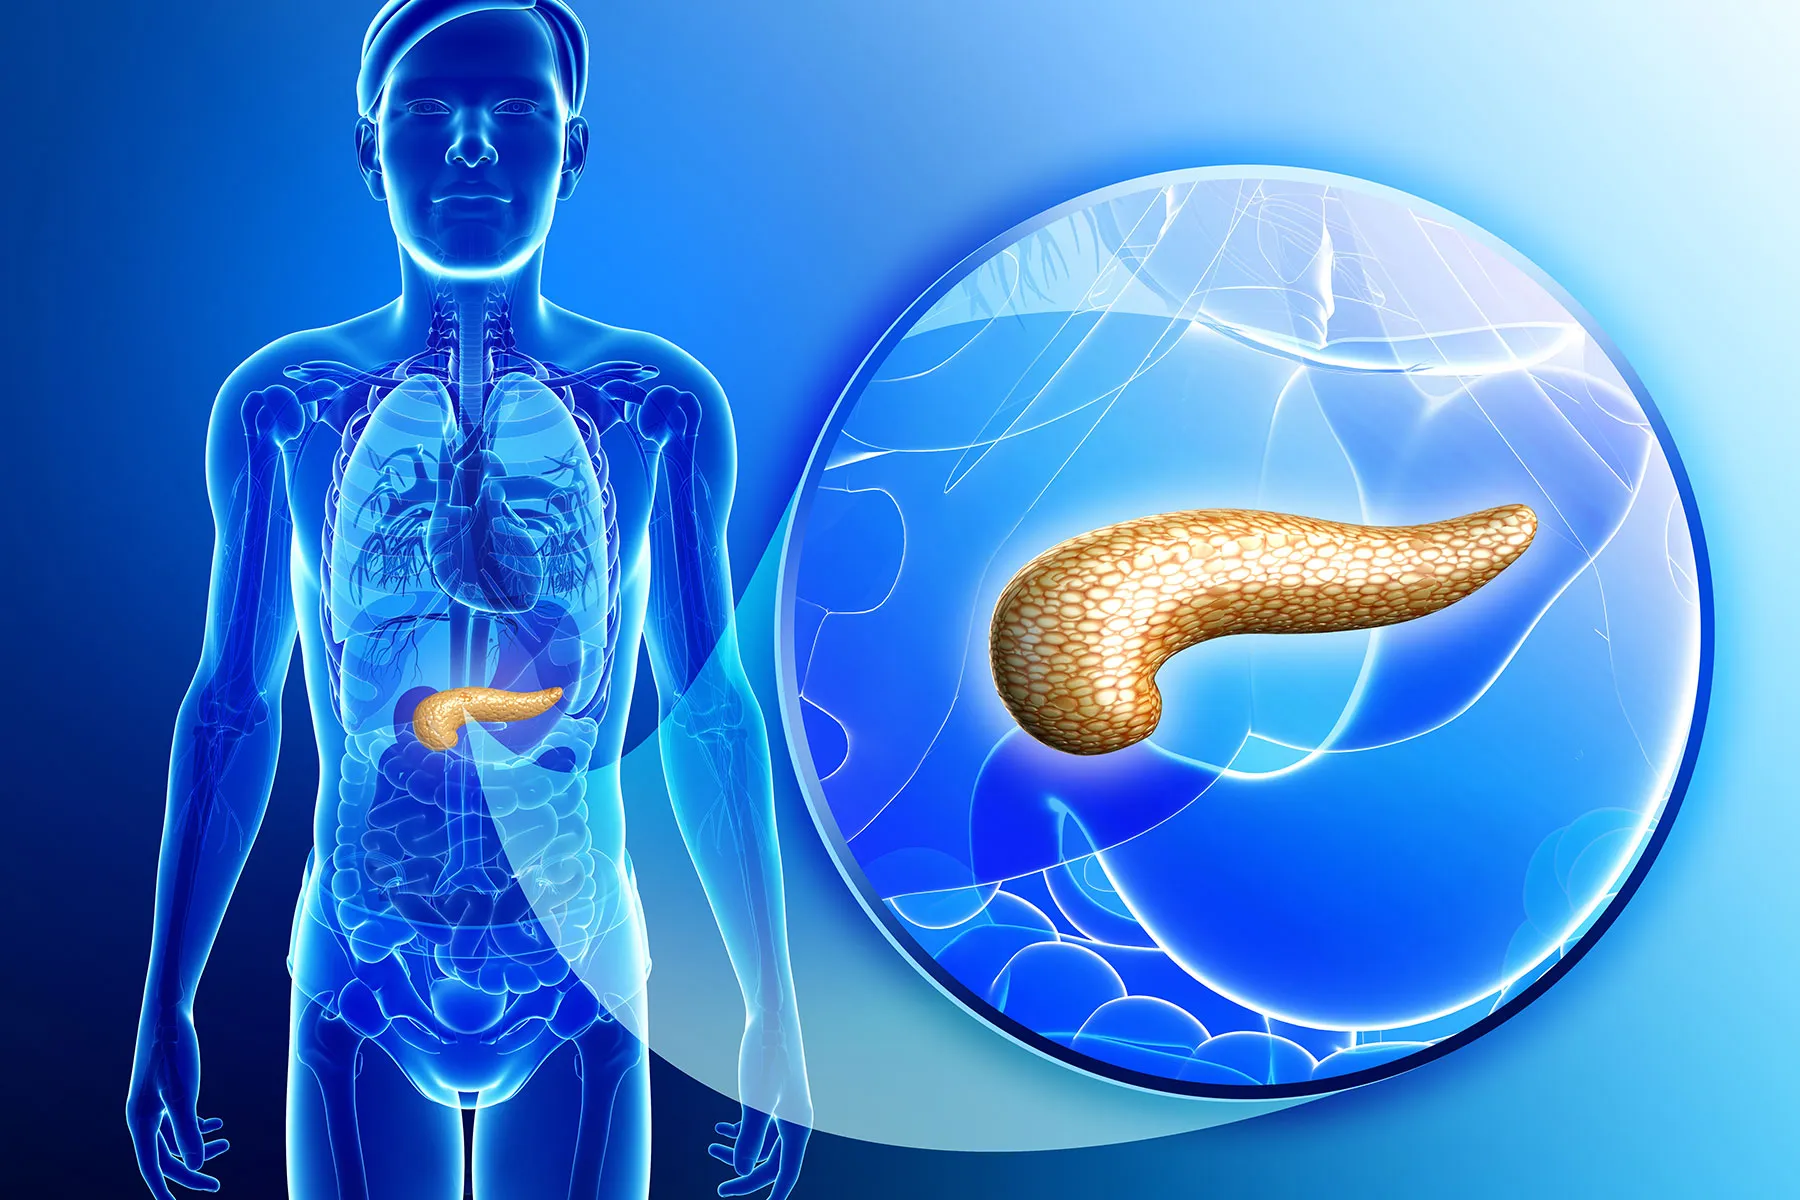 Exocrine Pancreatic Insufficiency: What It Is and Who’s at Risk